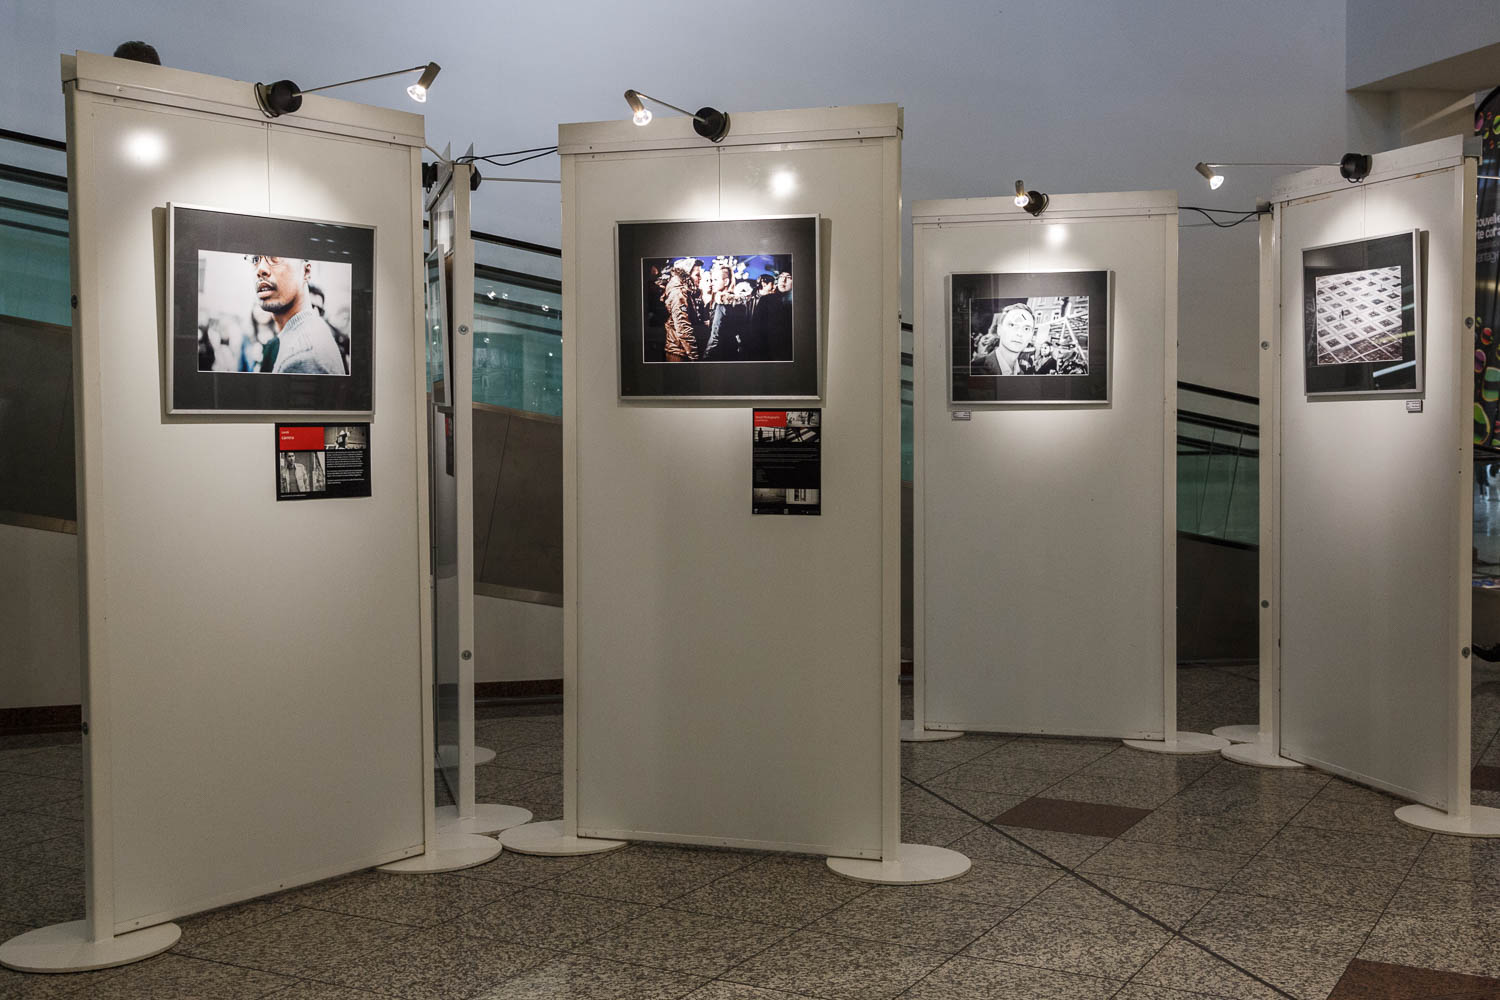 Collective exhibition by Street Photography Luxembourg at City Concorde in Bertrange